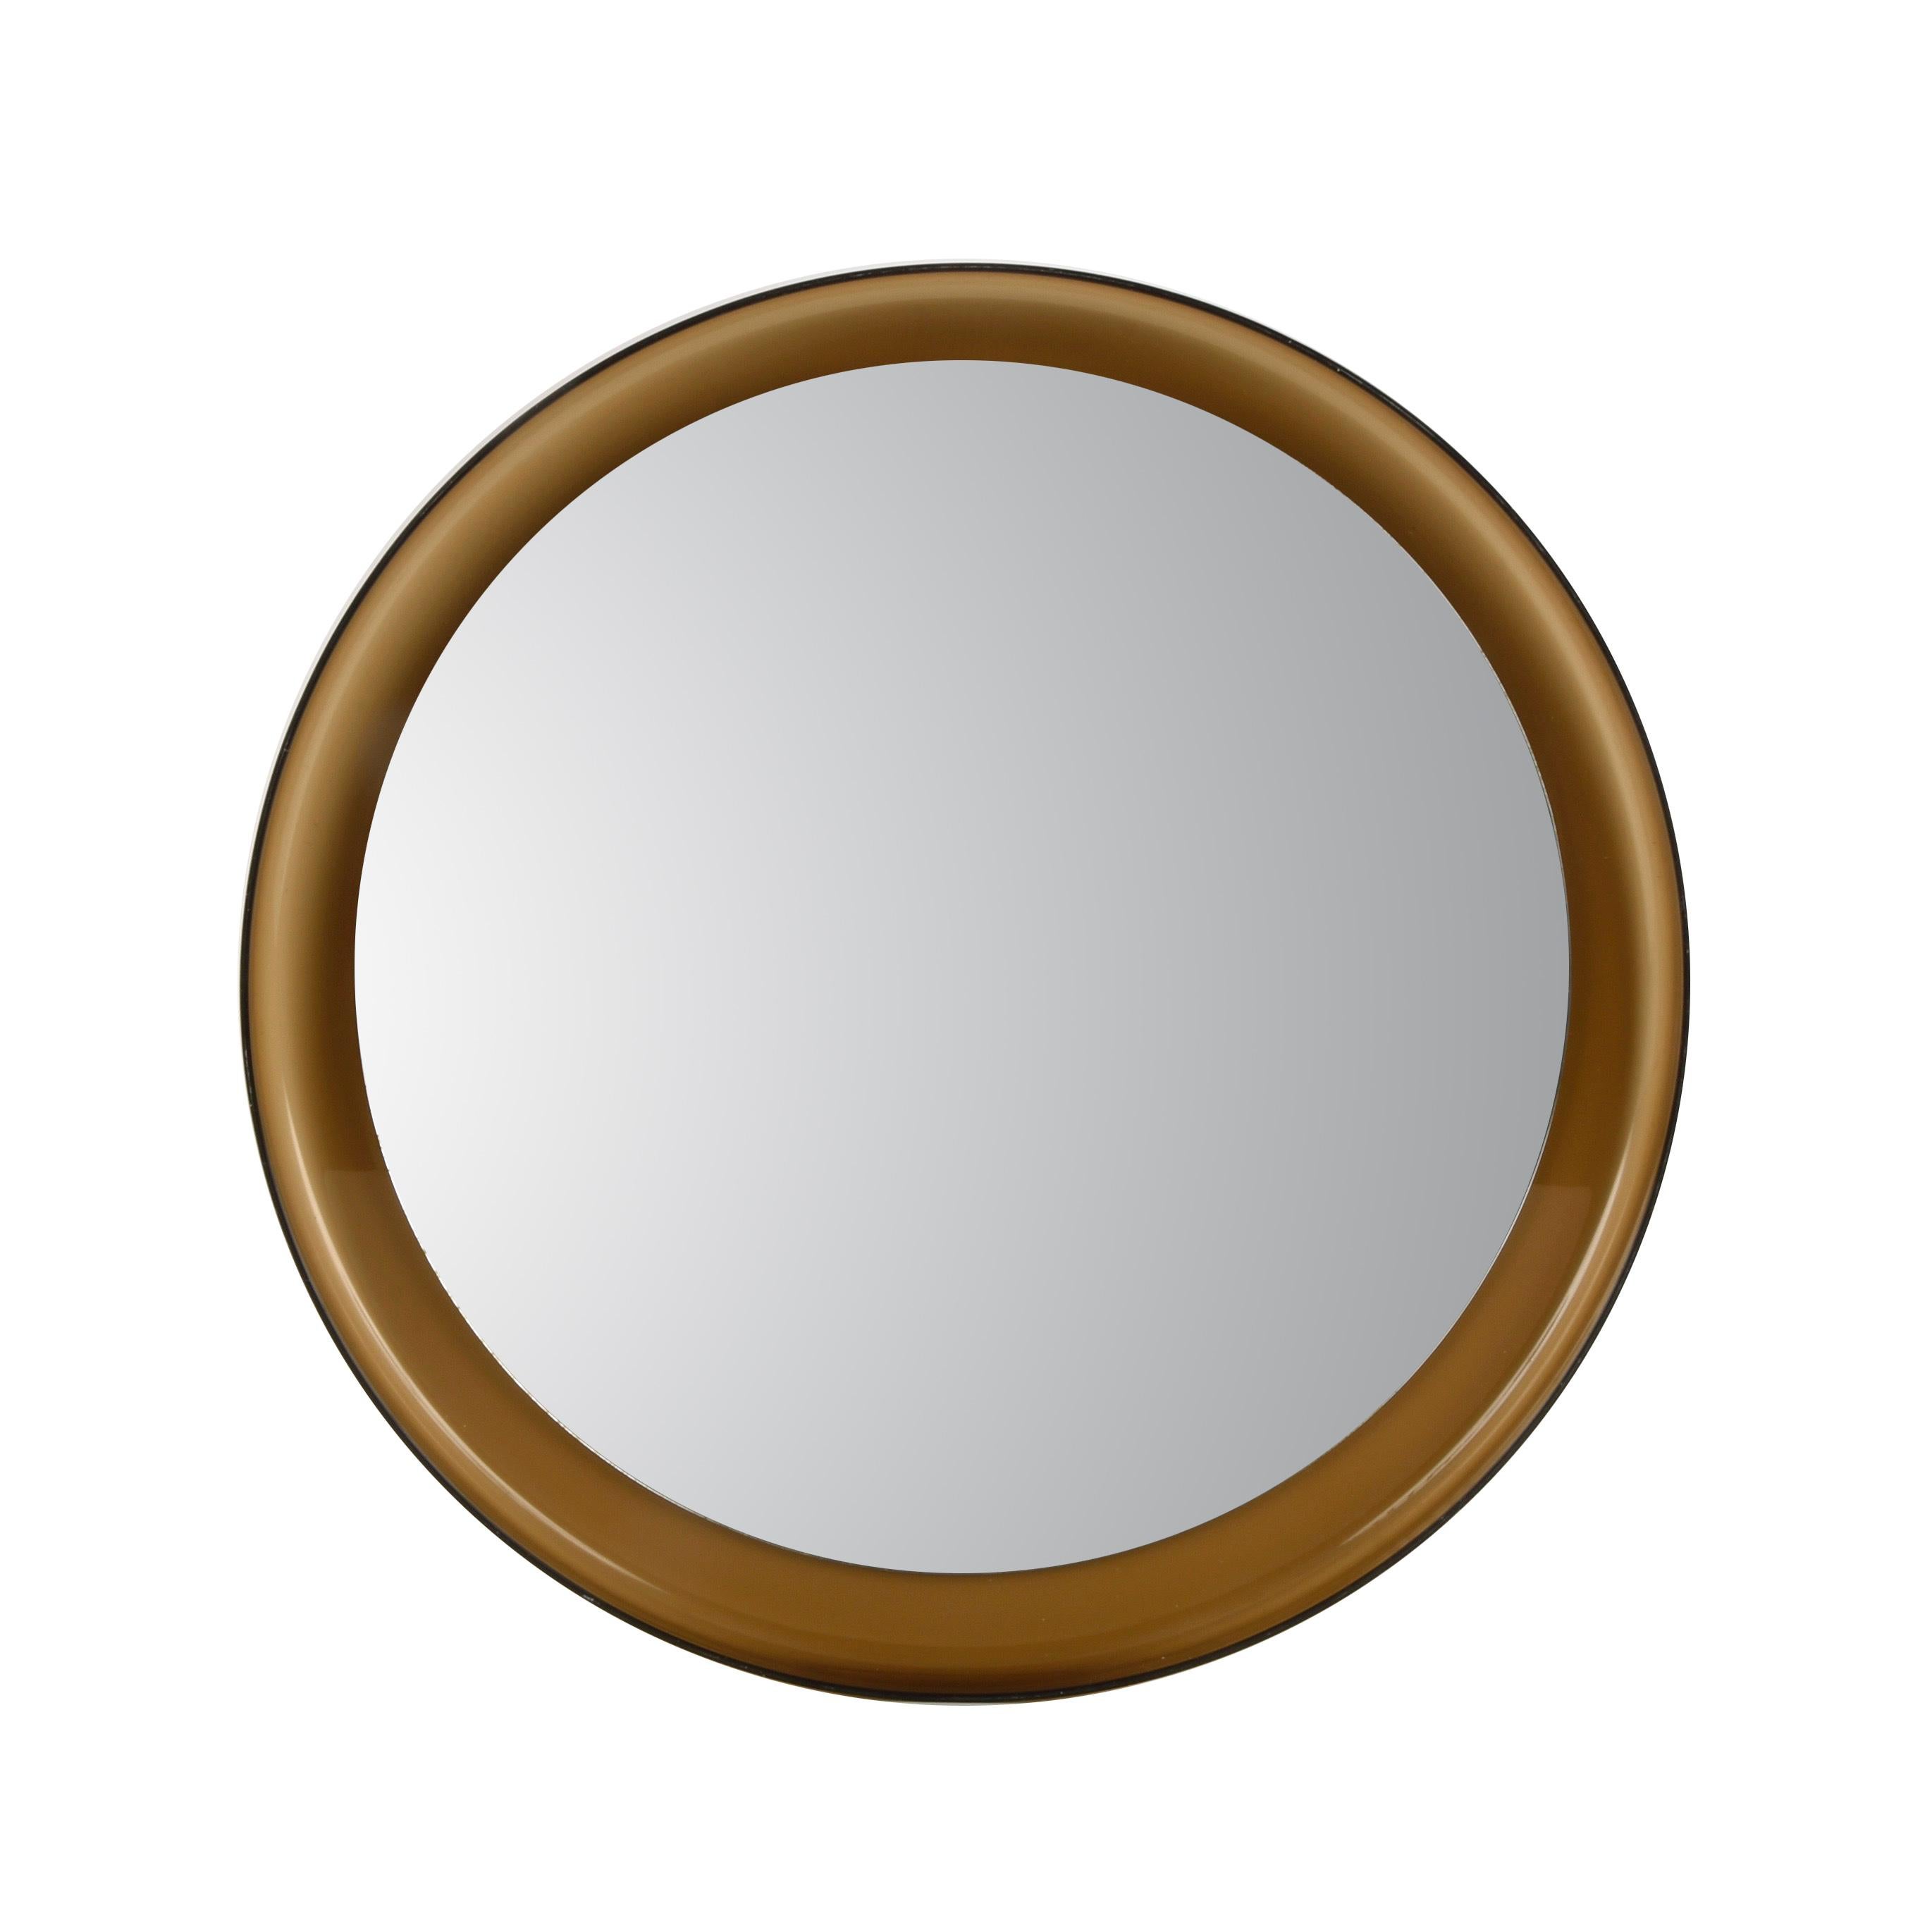 Amazing Mid Century smoke brown lucite wall mirror & wall mirror. This incredible object was produced in Italy in the 1960s.

This striking piece has a wonderful round brown lucite frame and a mirror. The conditions are good and original give